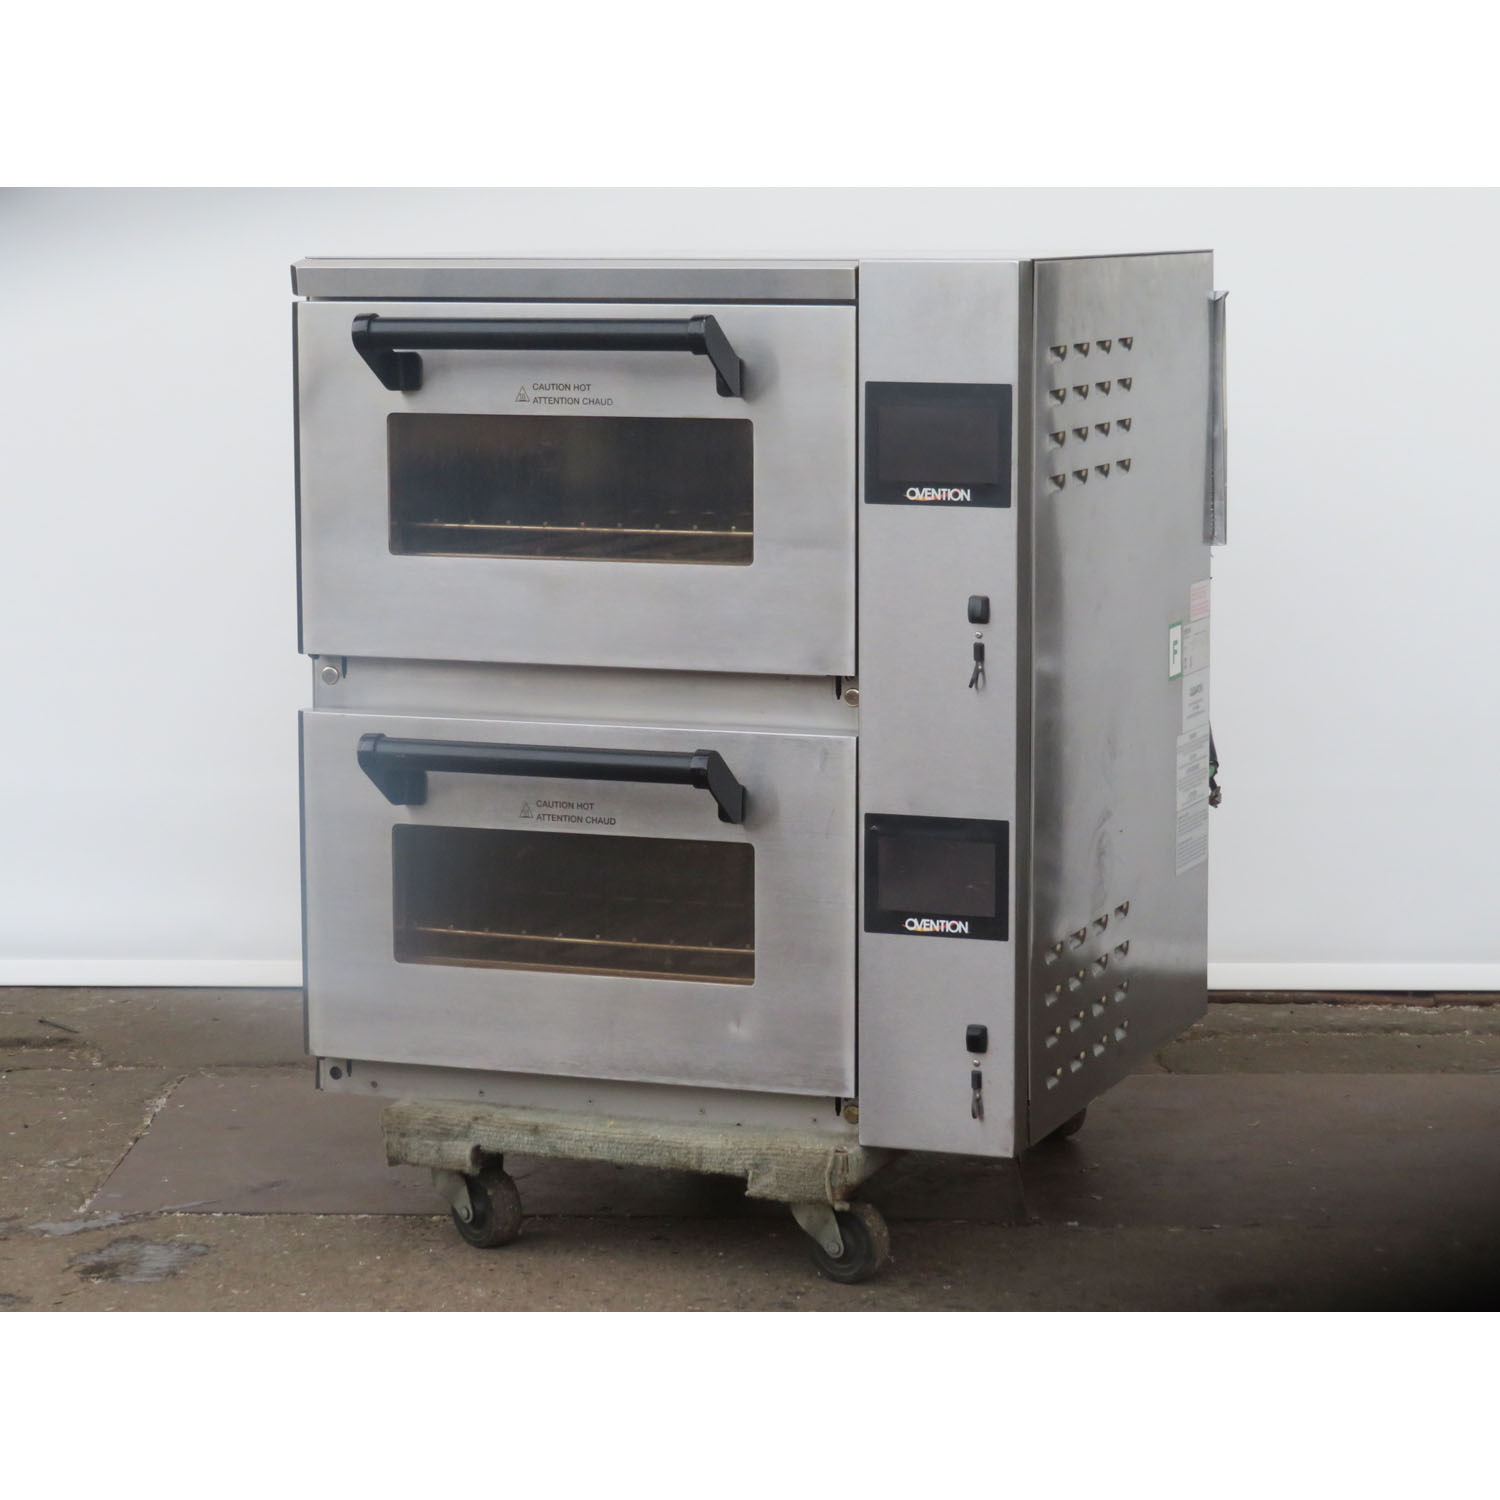 Ovention MILO2-16 Double Electric Oven, Used Great Condition